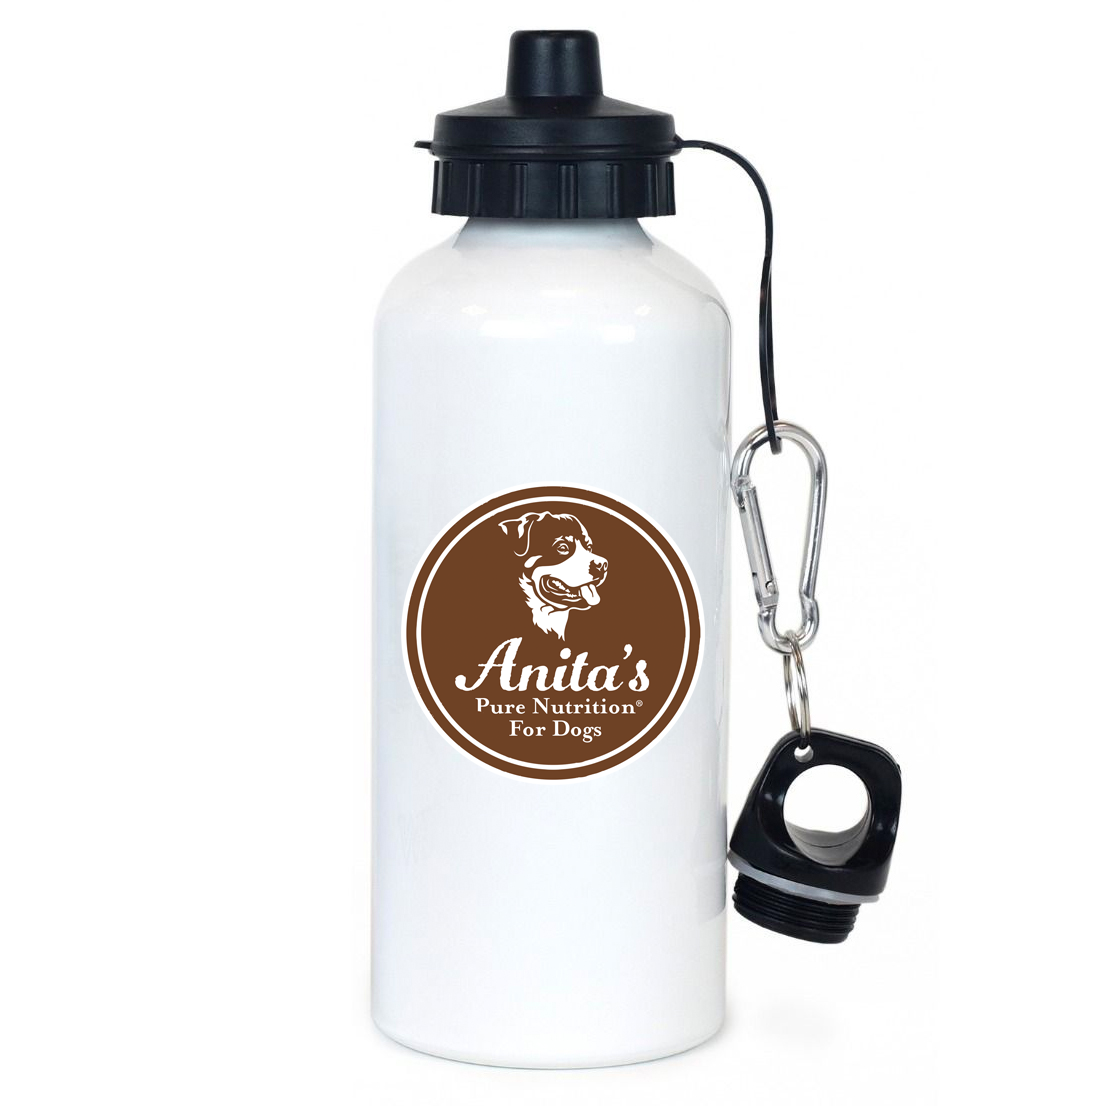 Anita's Pure Nutrition For Dogs Team Water Bottle